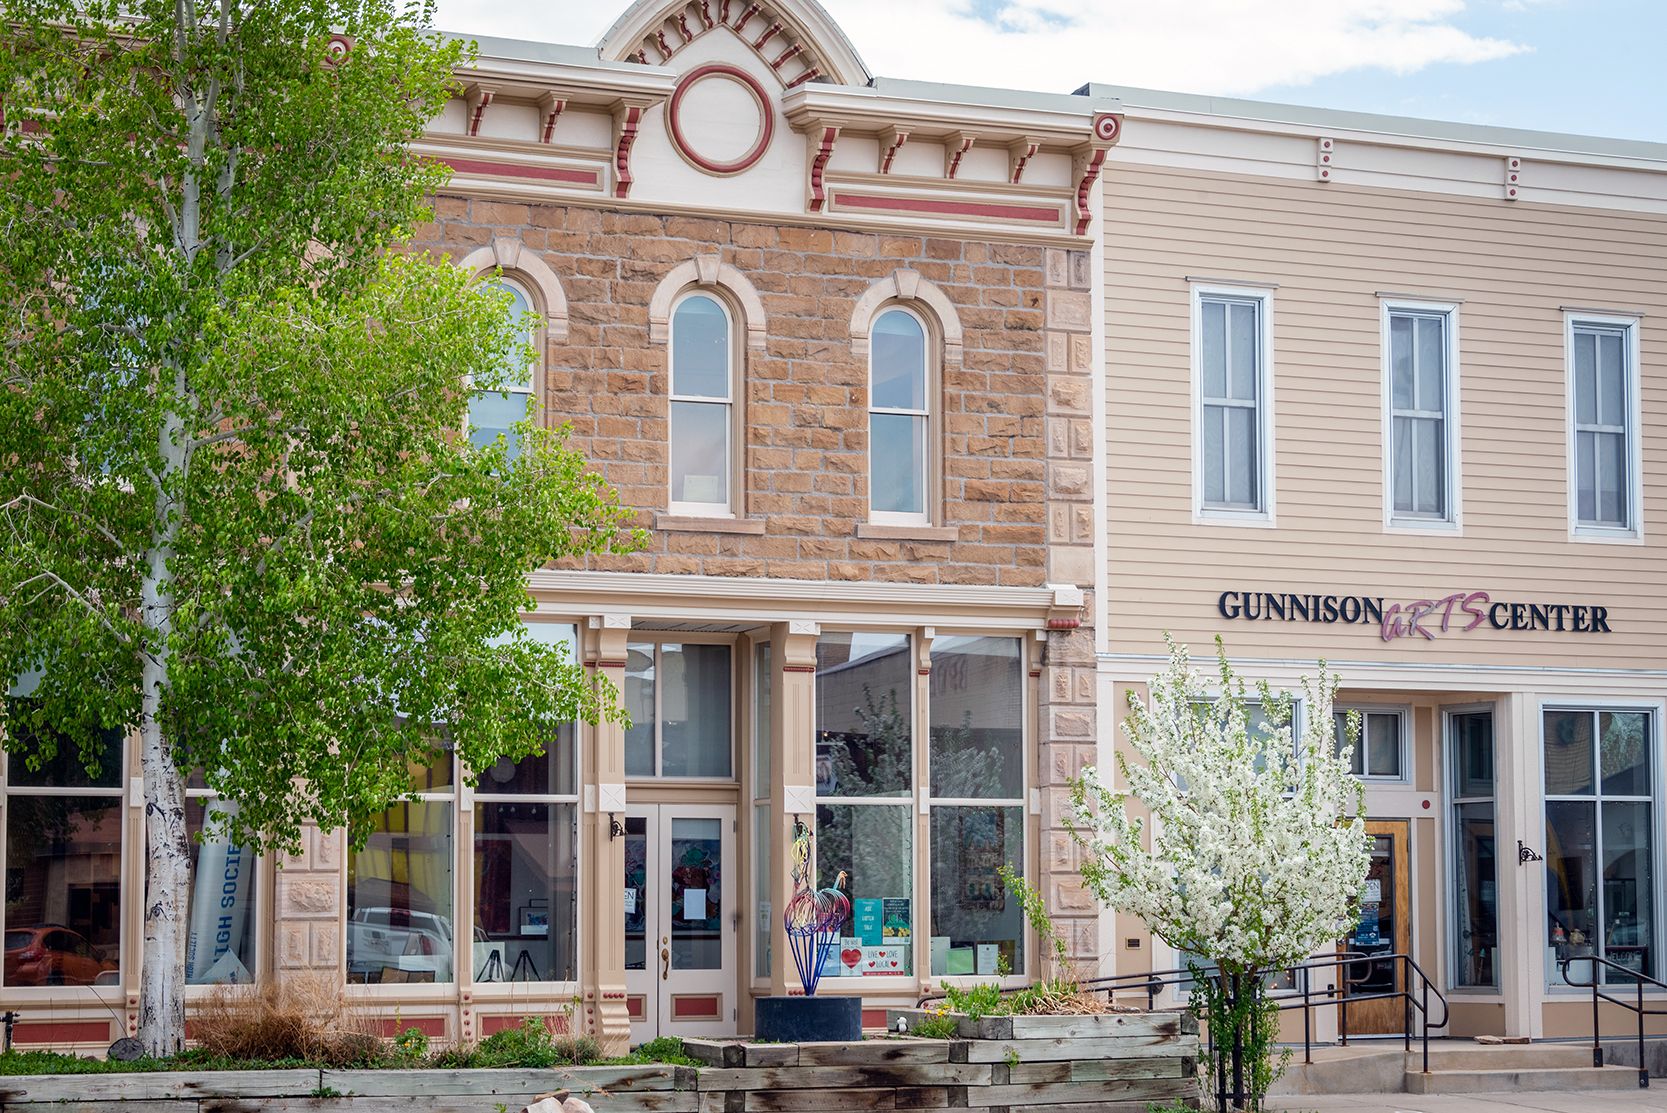 Green leaves and white flowers adorn the trees in downtown Gunnison on a spring day.